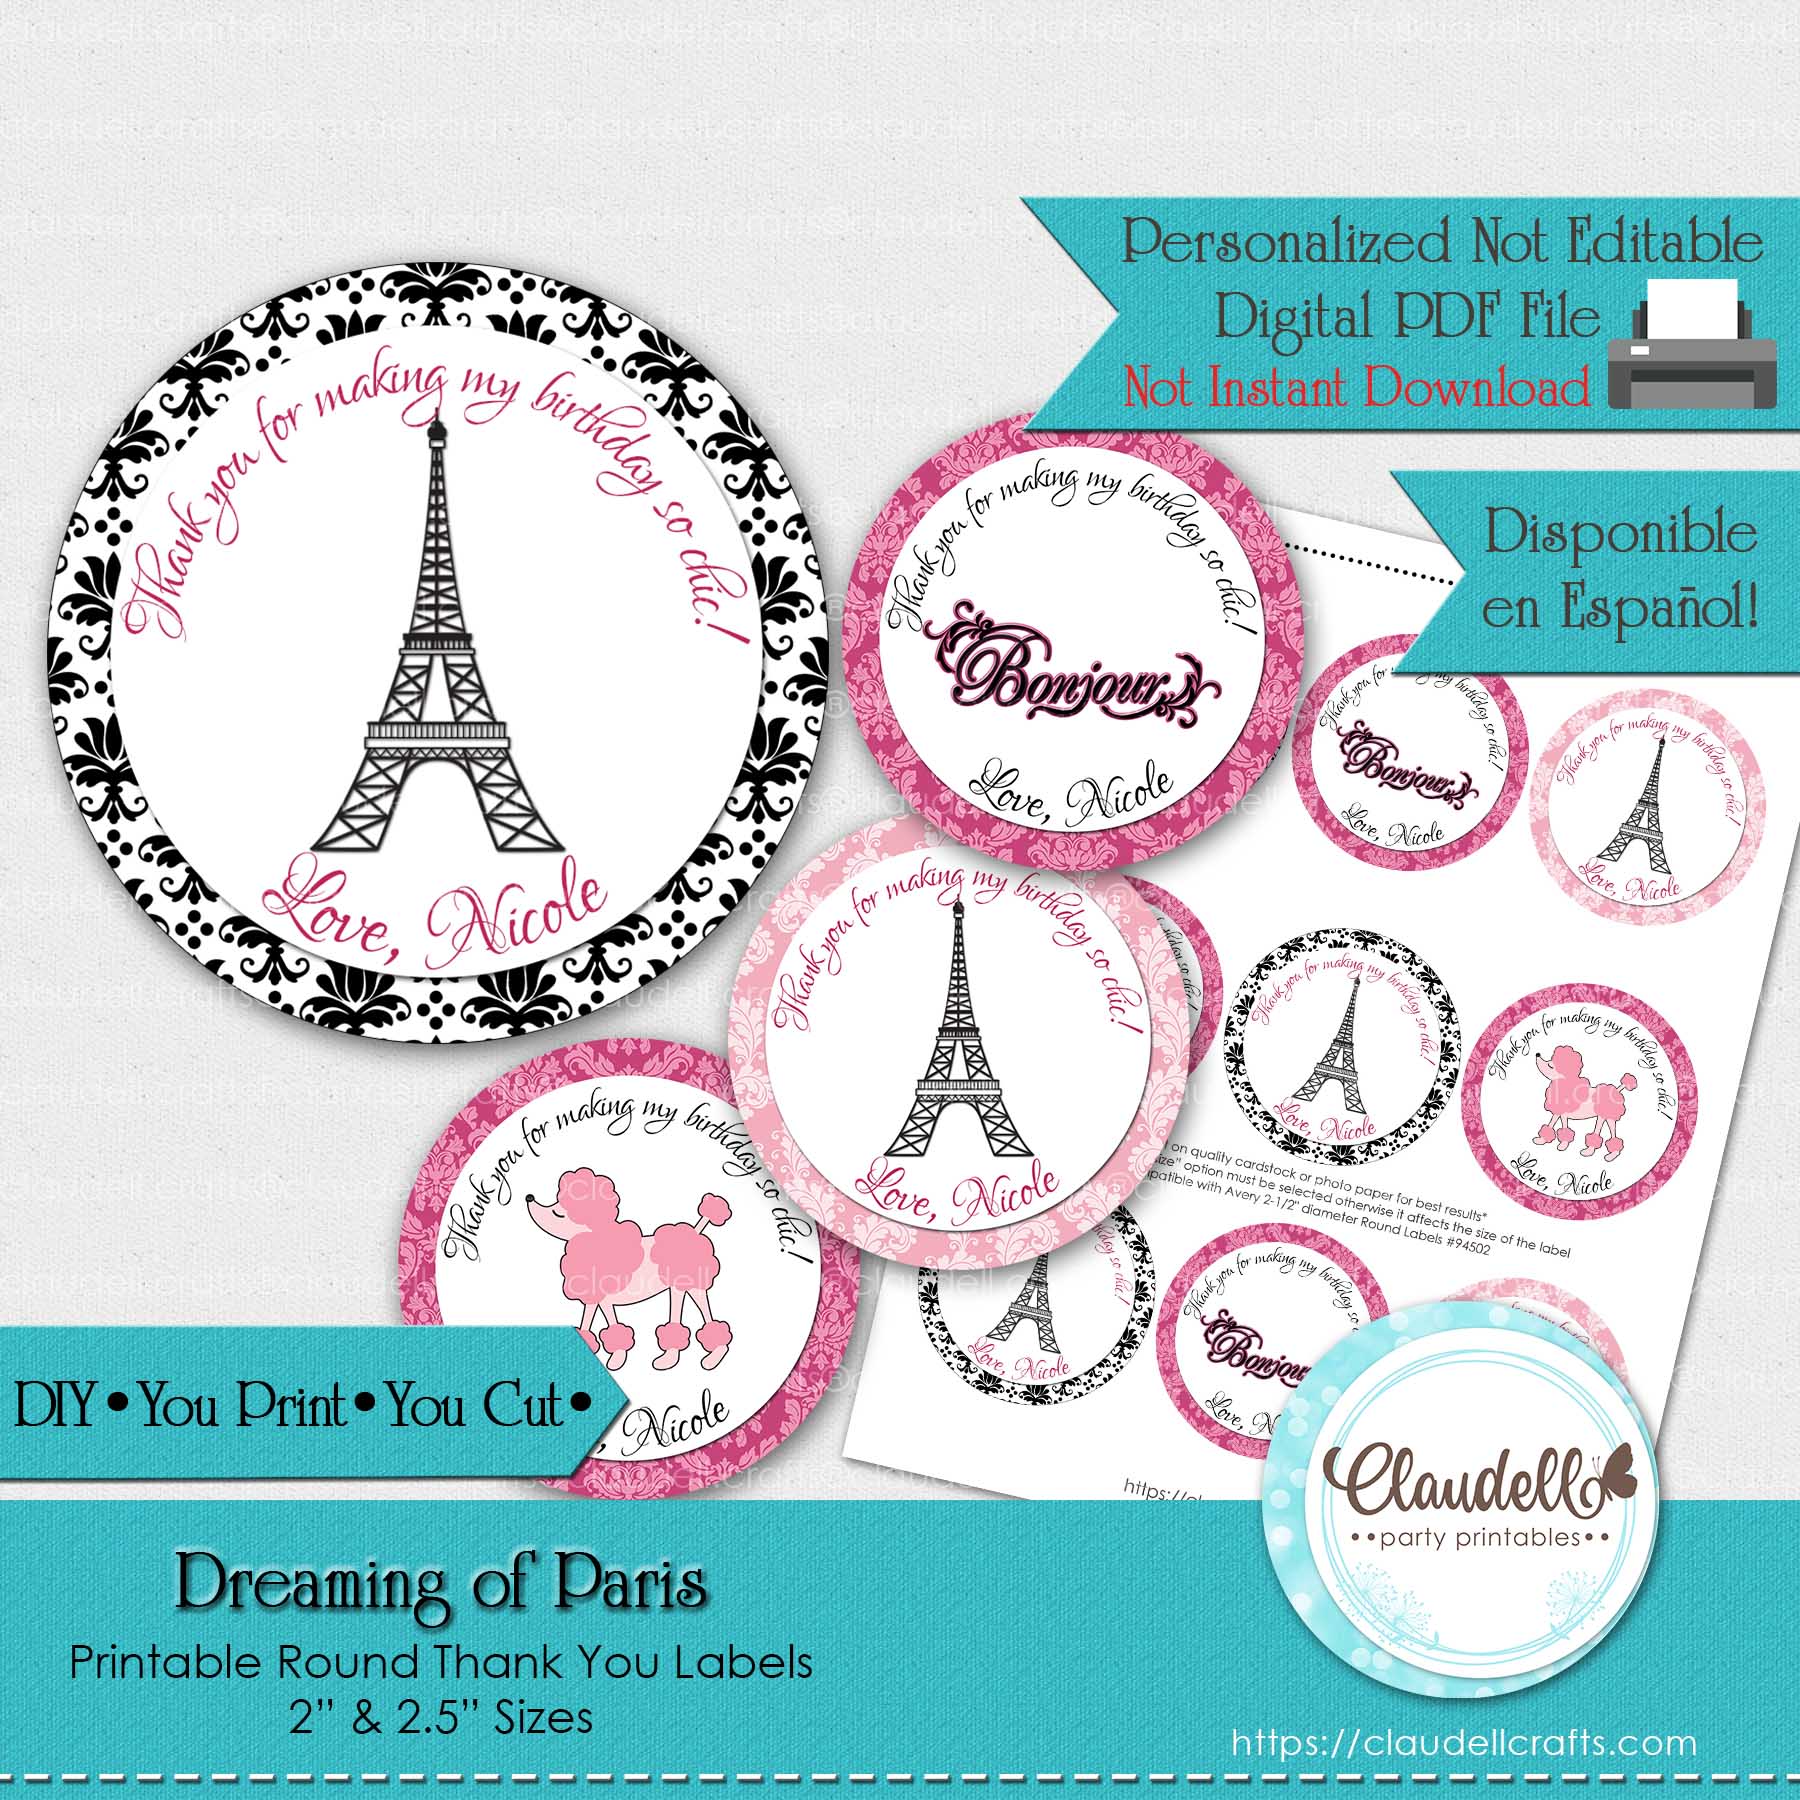 Dreaming of Paris Labels Birthday Party, Paris Party Round Thank You Labels, Paris Personalized Labels, Glam Party, Paris One Birthday Party, Paris Party Favors/Digital File Only